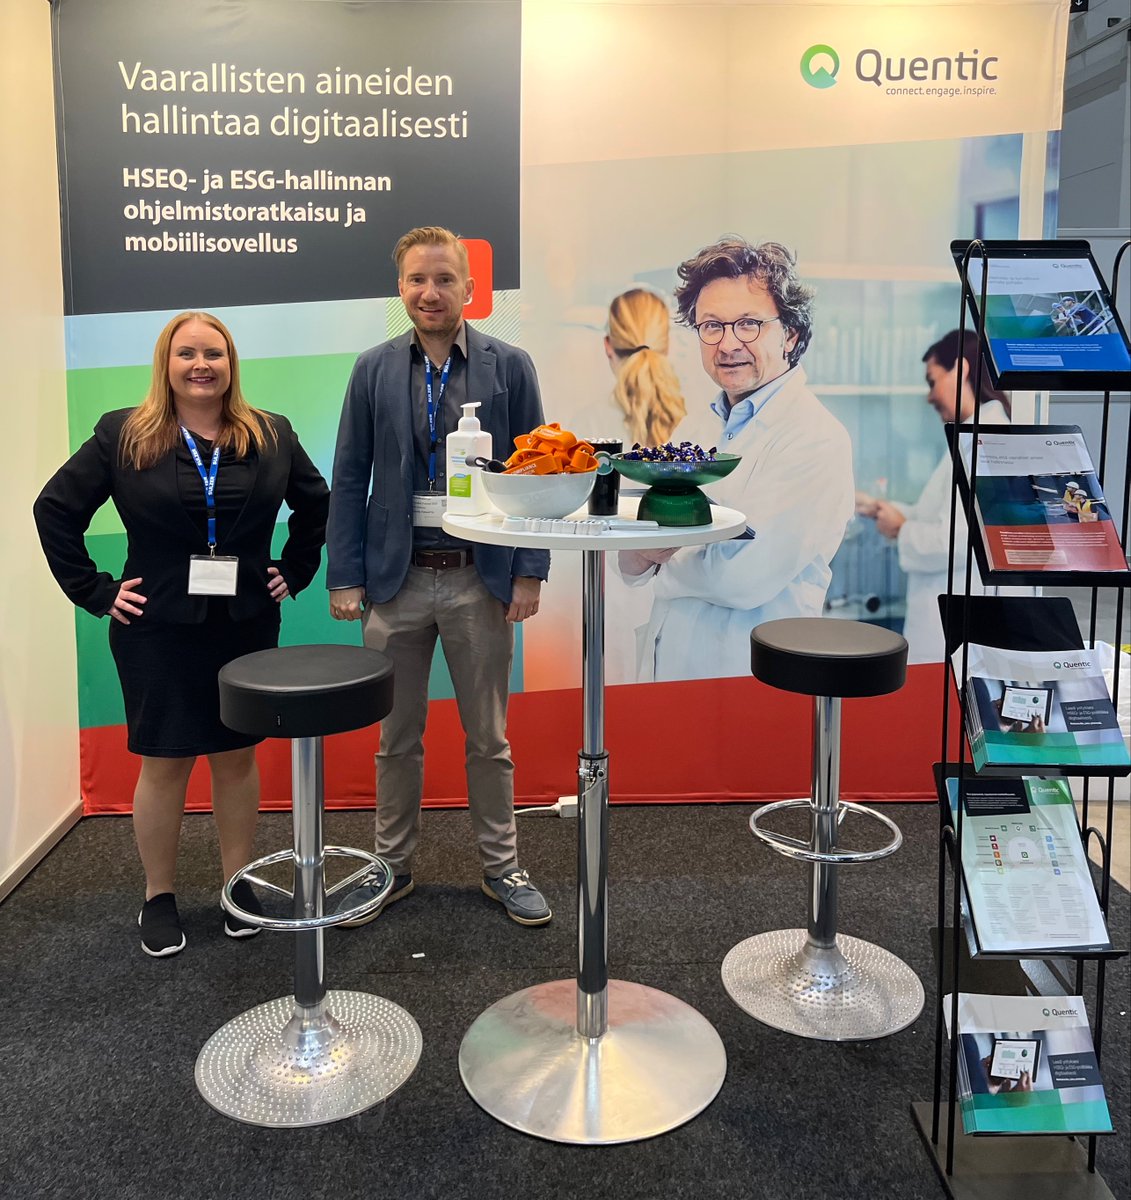 Here we are ready for ChemBio Finland 2022 in Helsinki. Come and say hello to us at stand no. 1c28!
#chembio2022 #EHS https://t.co/mhxu8f1JmJ